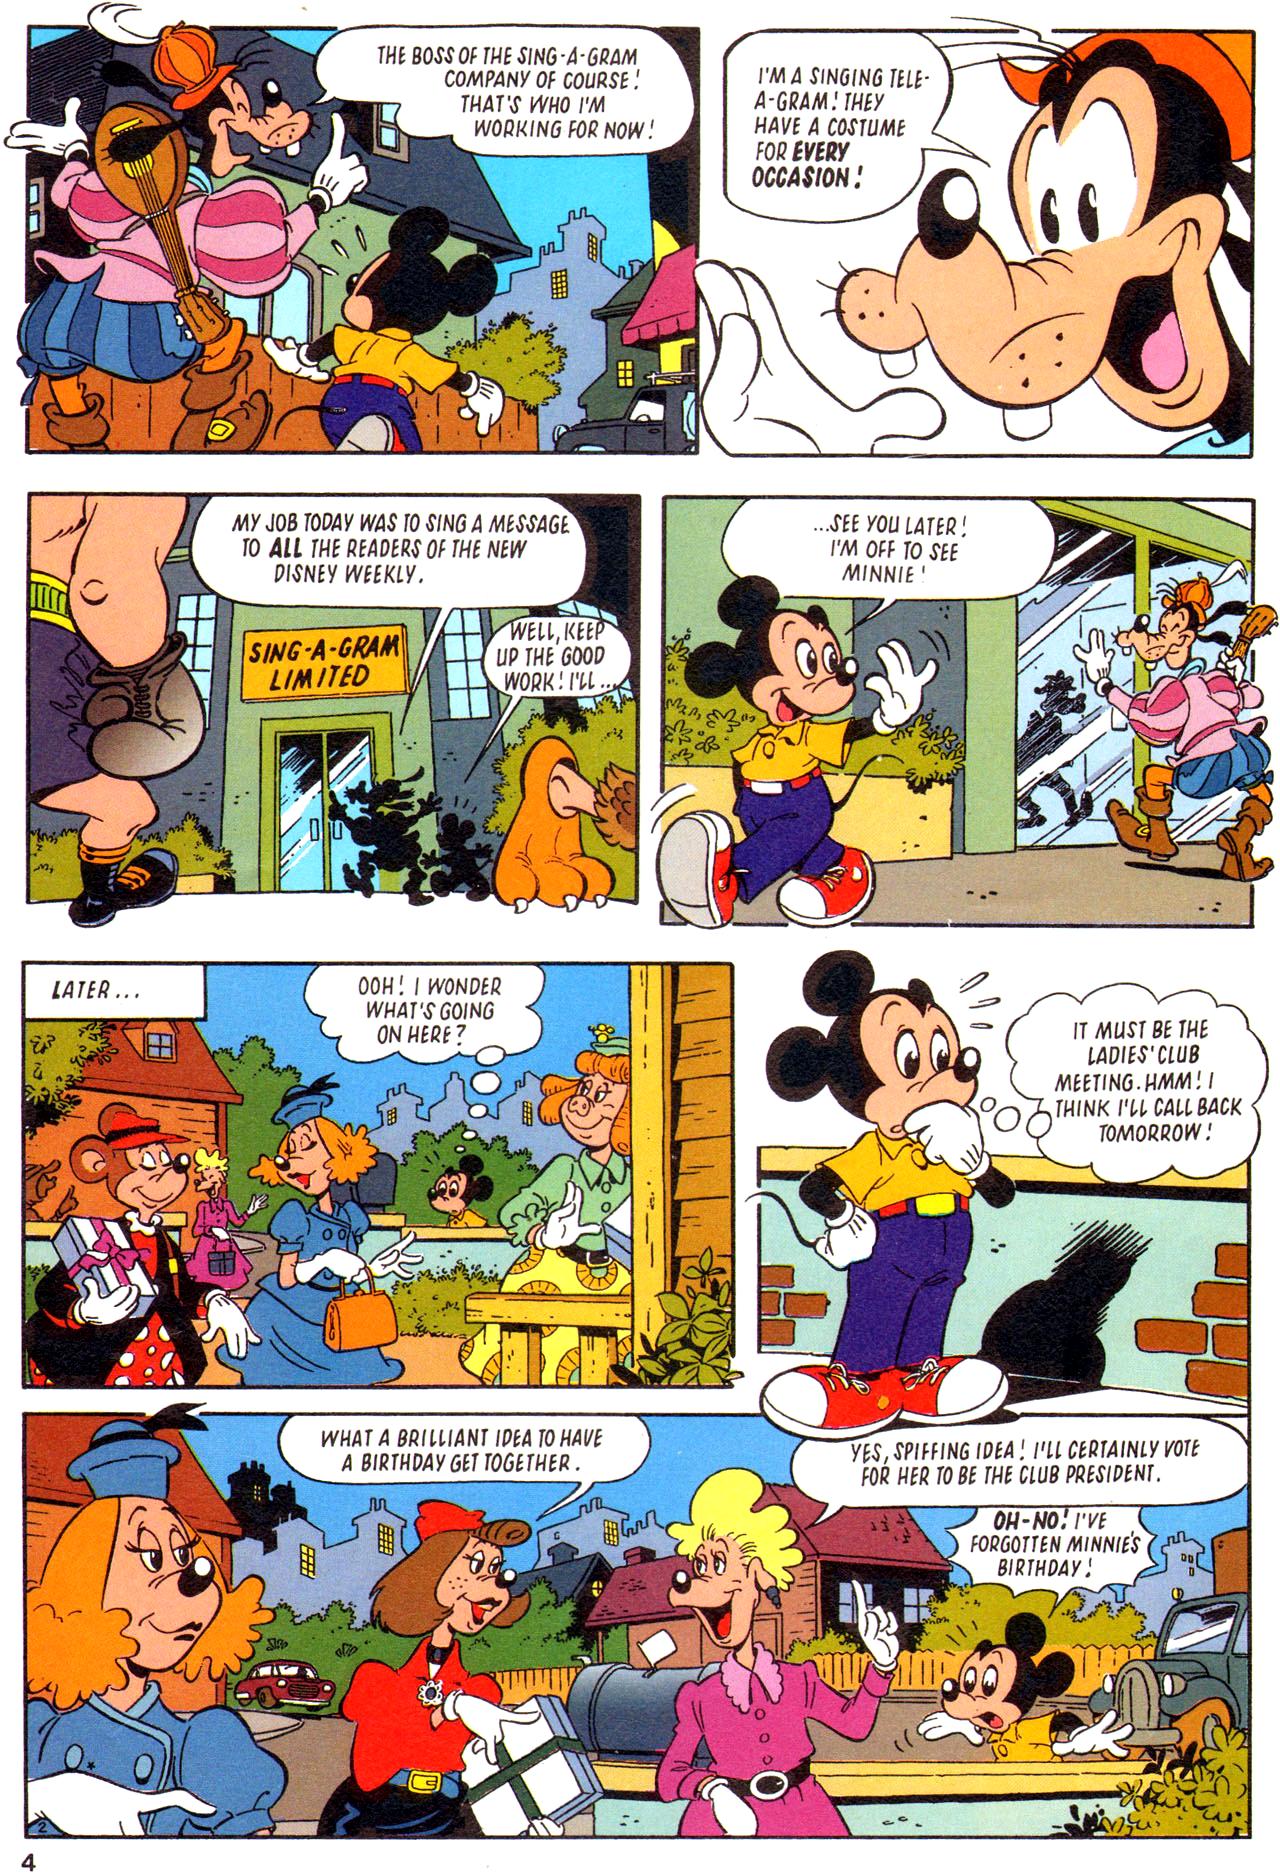 Read online The Disney Weekly comic -  Issue # Full - 4